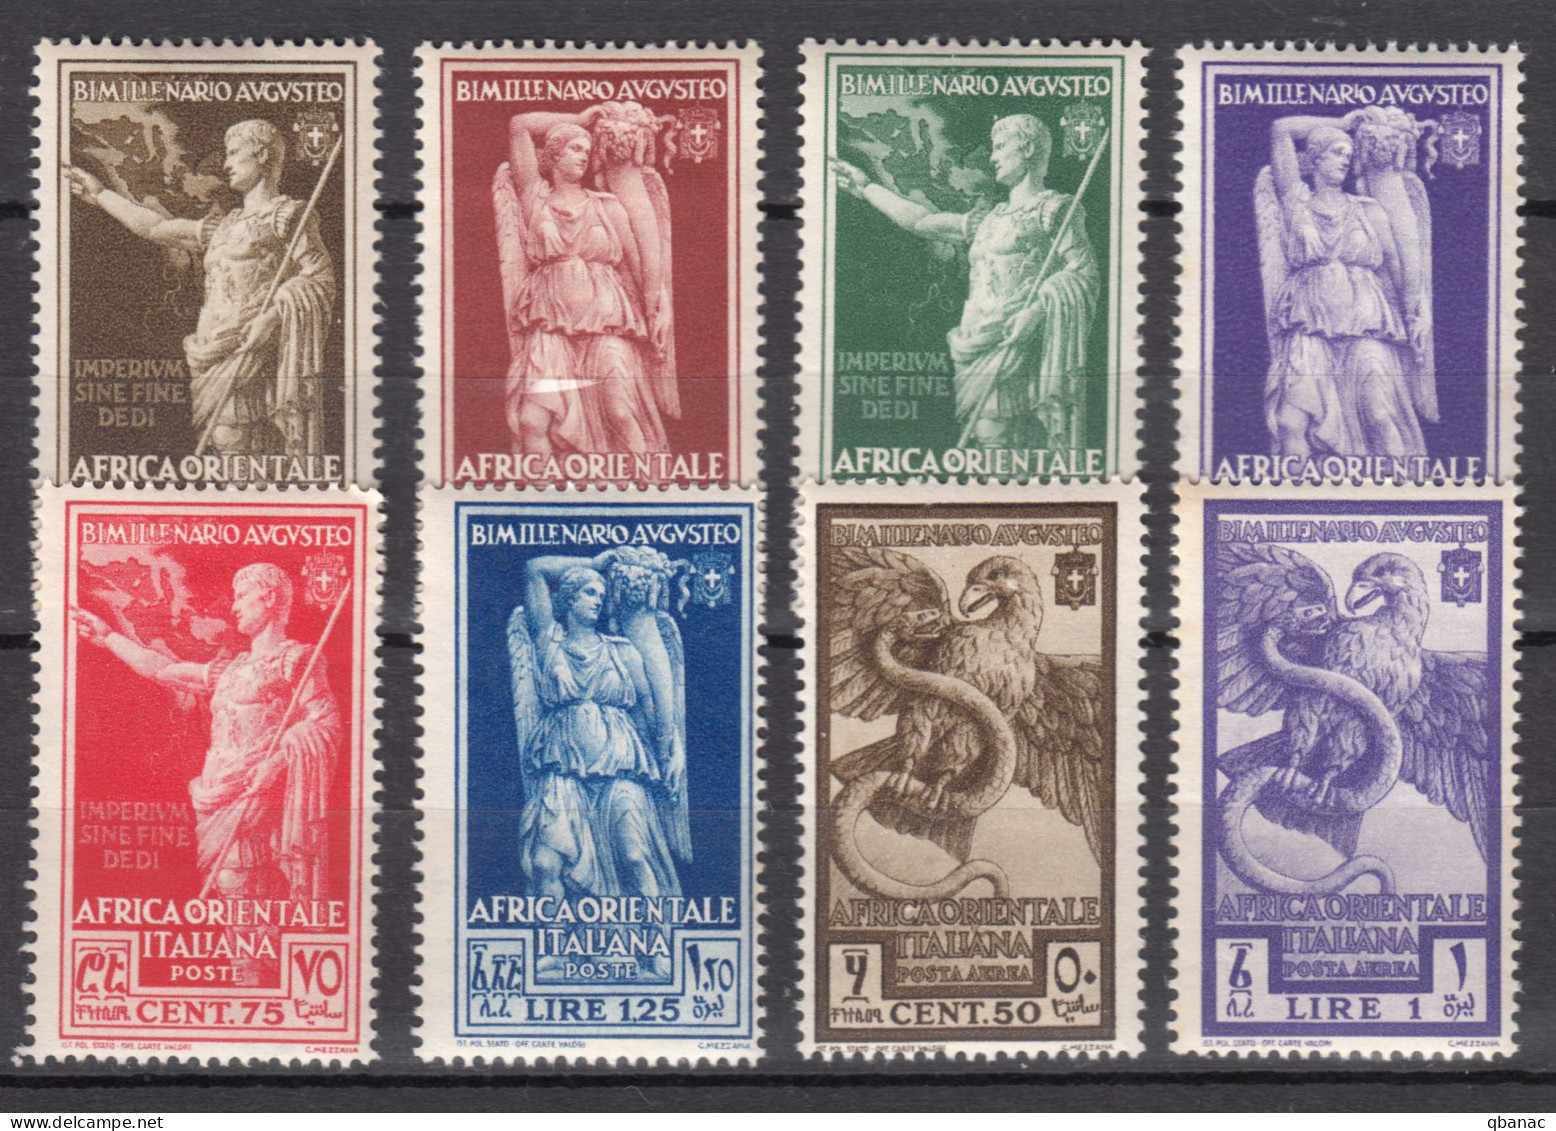 Italy Colonies East Africa 1938 Sassone#21-26 + Posta Aerea #A14-A15 Mint Never Hinged - Afrique Orientale Italienne